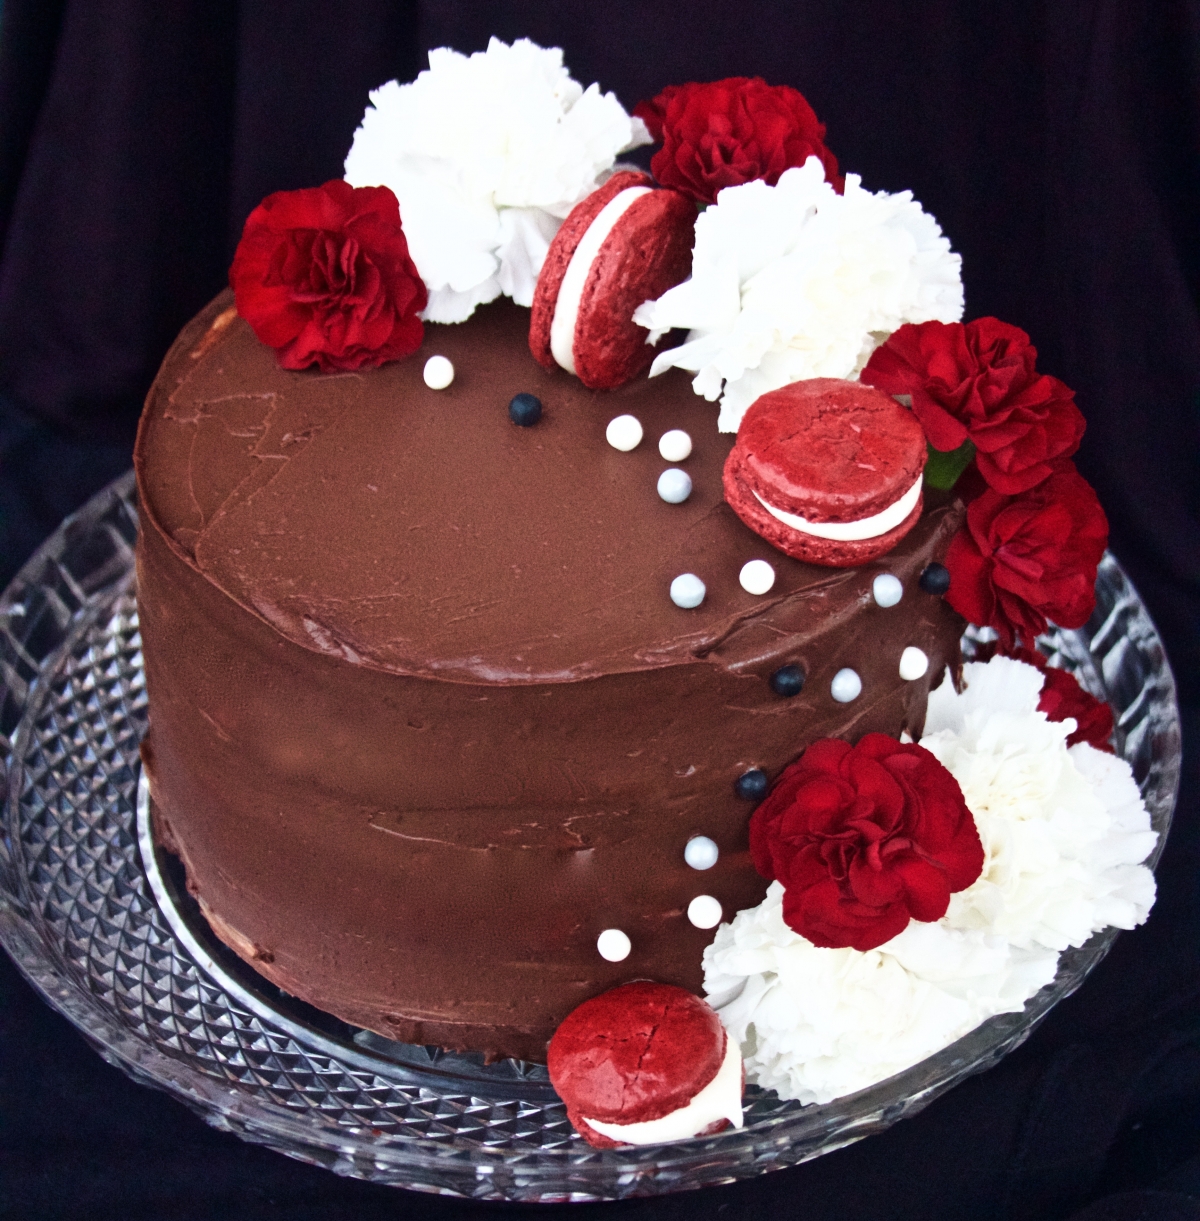 Red Velvet Layer Cake With White Chocolate Mousse And Chocolate Ganache